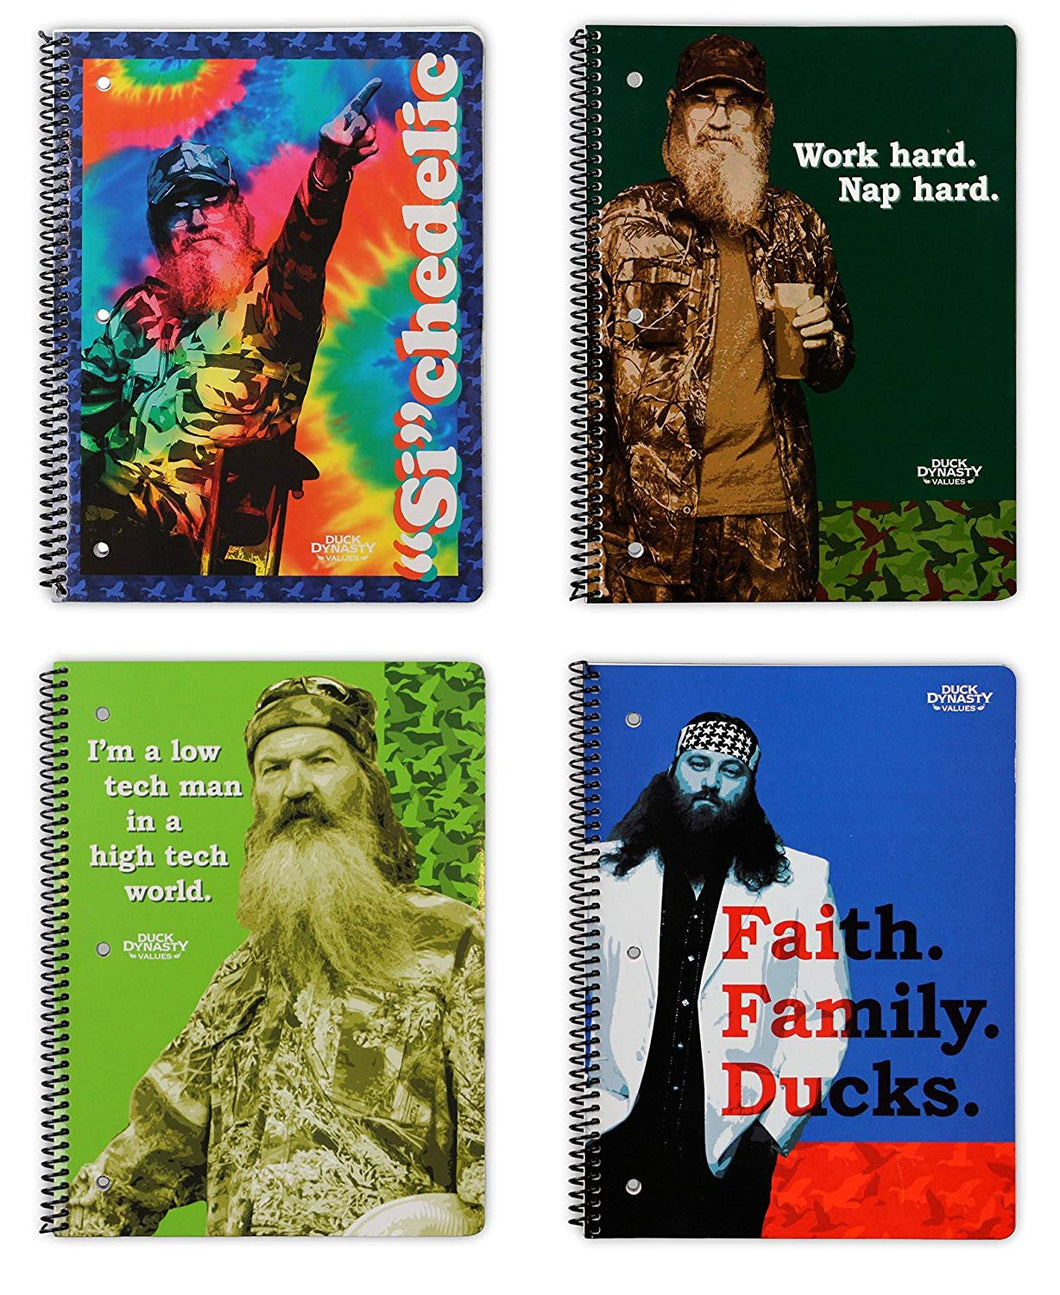 4 Duck Dynasty Spiral Bound Notebooks - 90 Wide Ruled Sheets 10.5